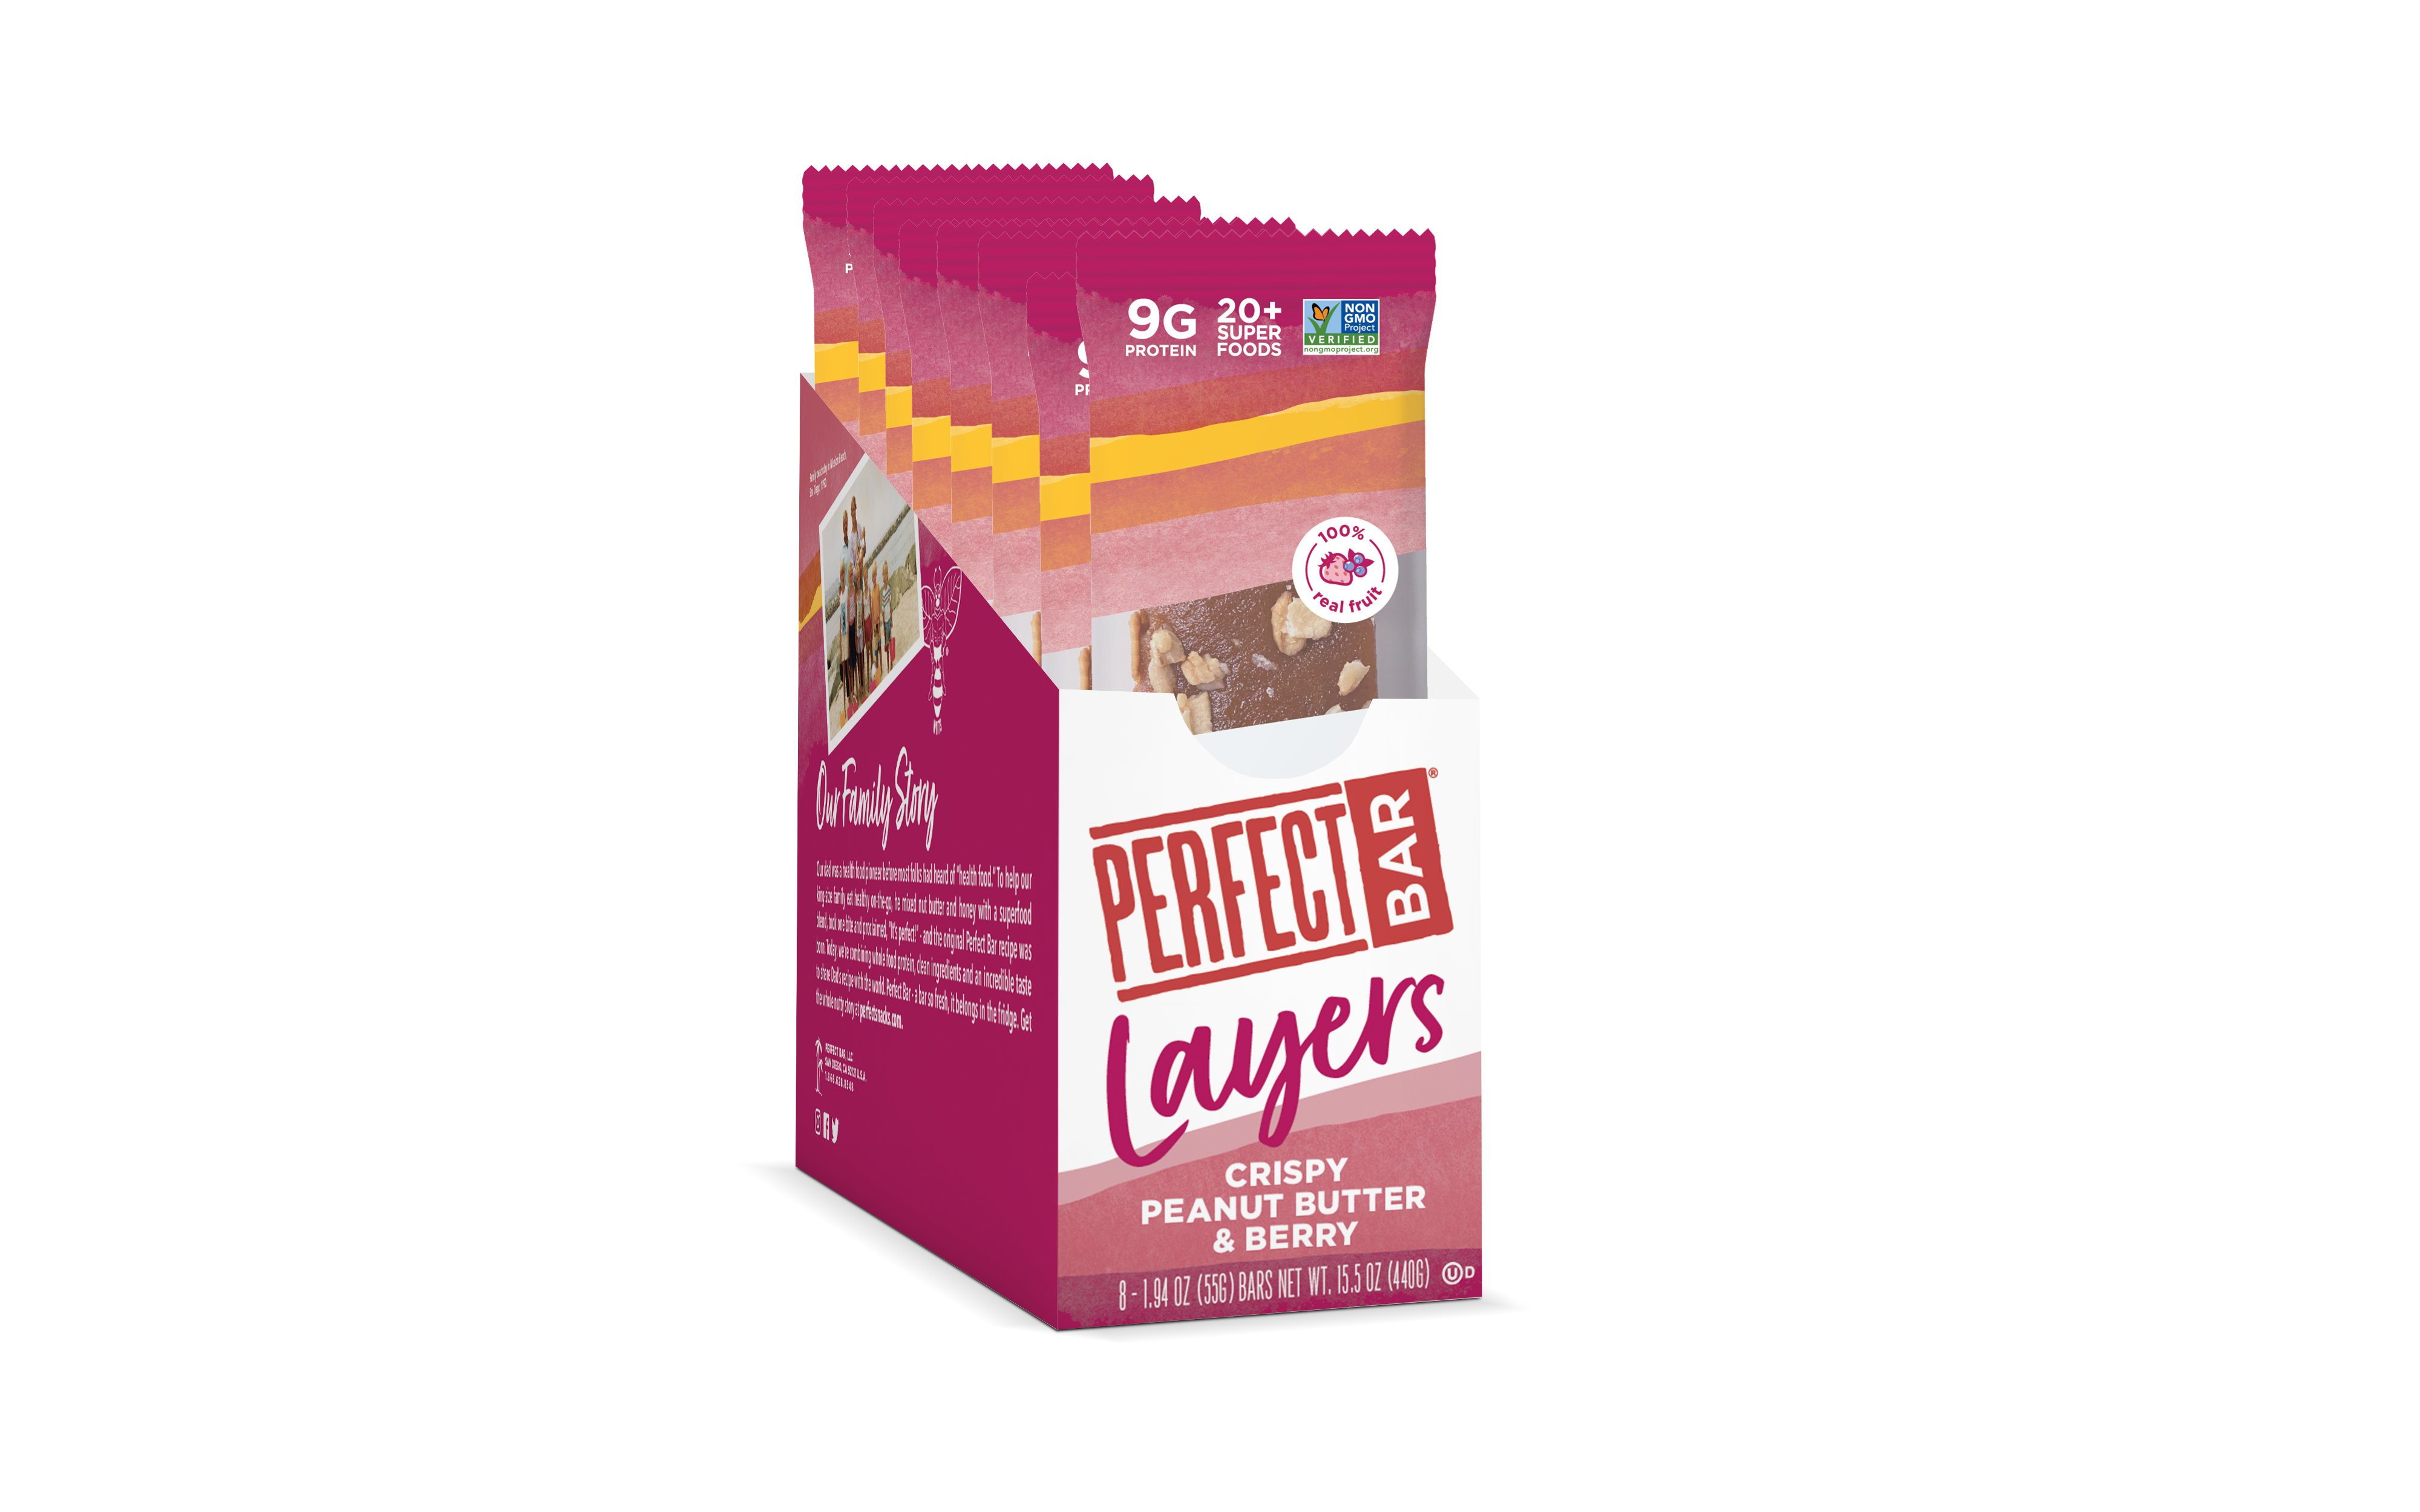 Crispy Peanut Butter & Berry Layers: An homage to the classic PB&J with 9g of whole food protein